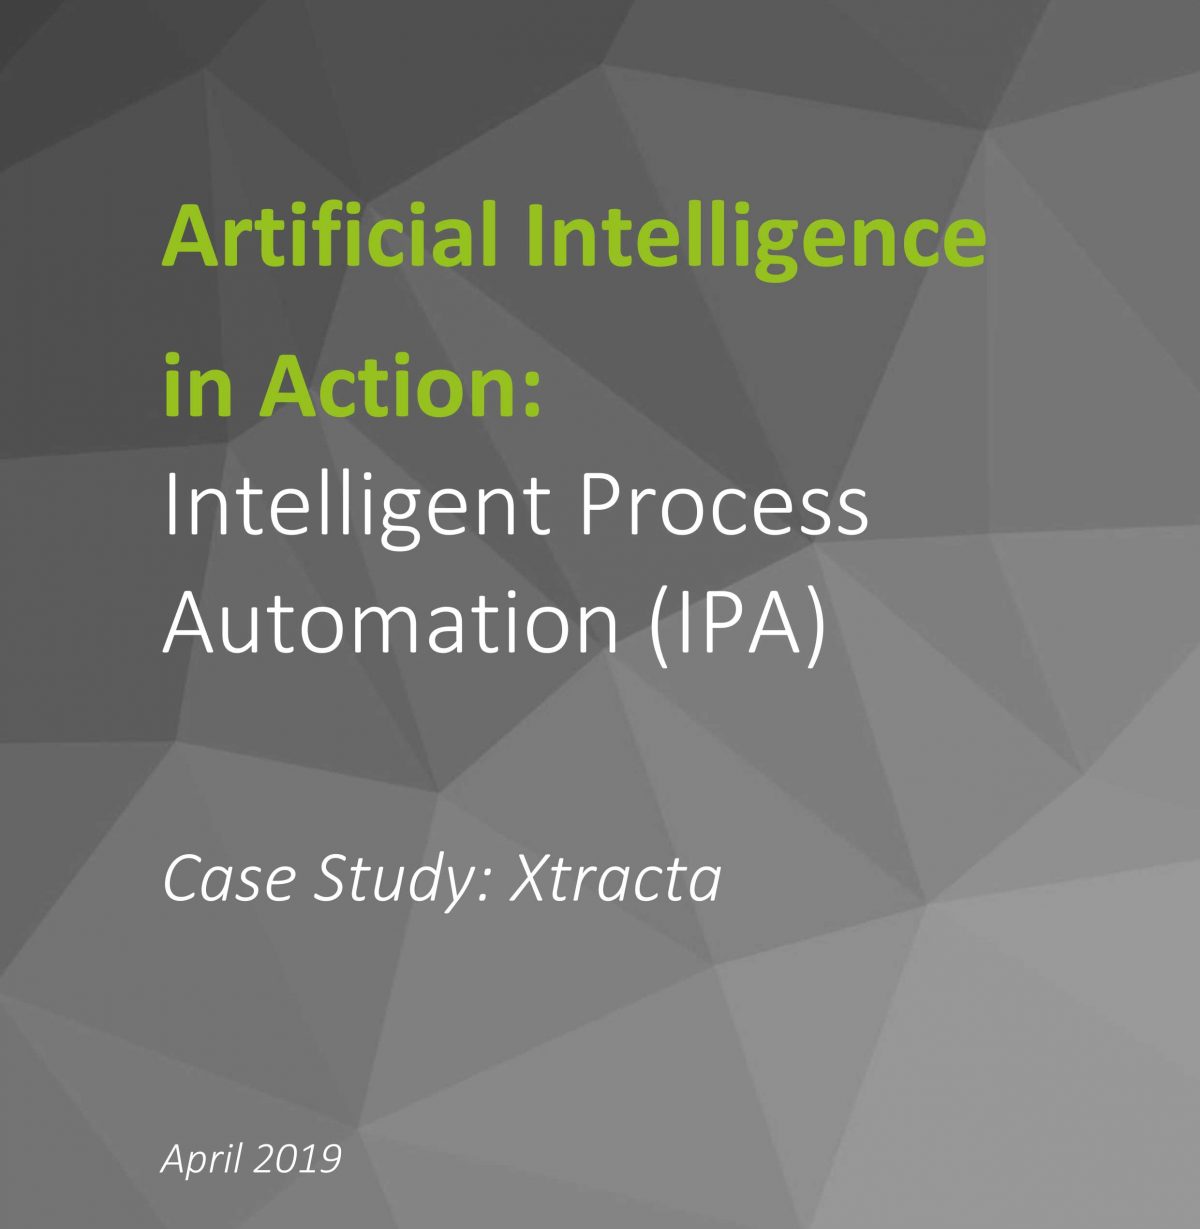 Artificial Intelligence in Action: Intelligent Process Automation (IPA)